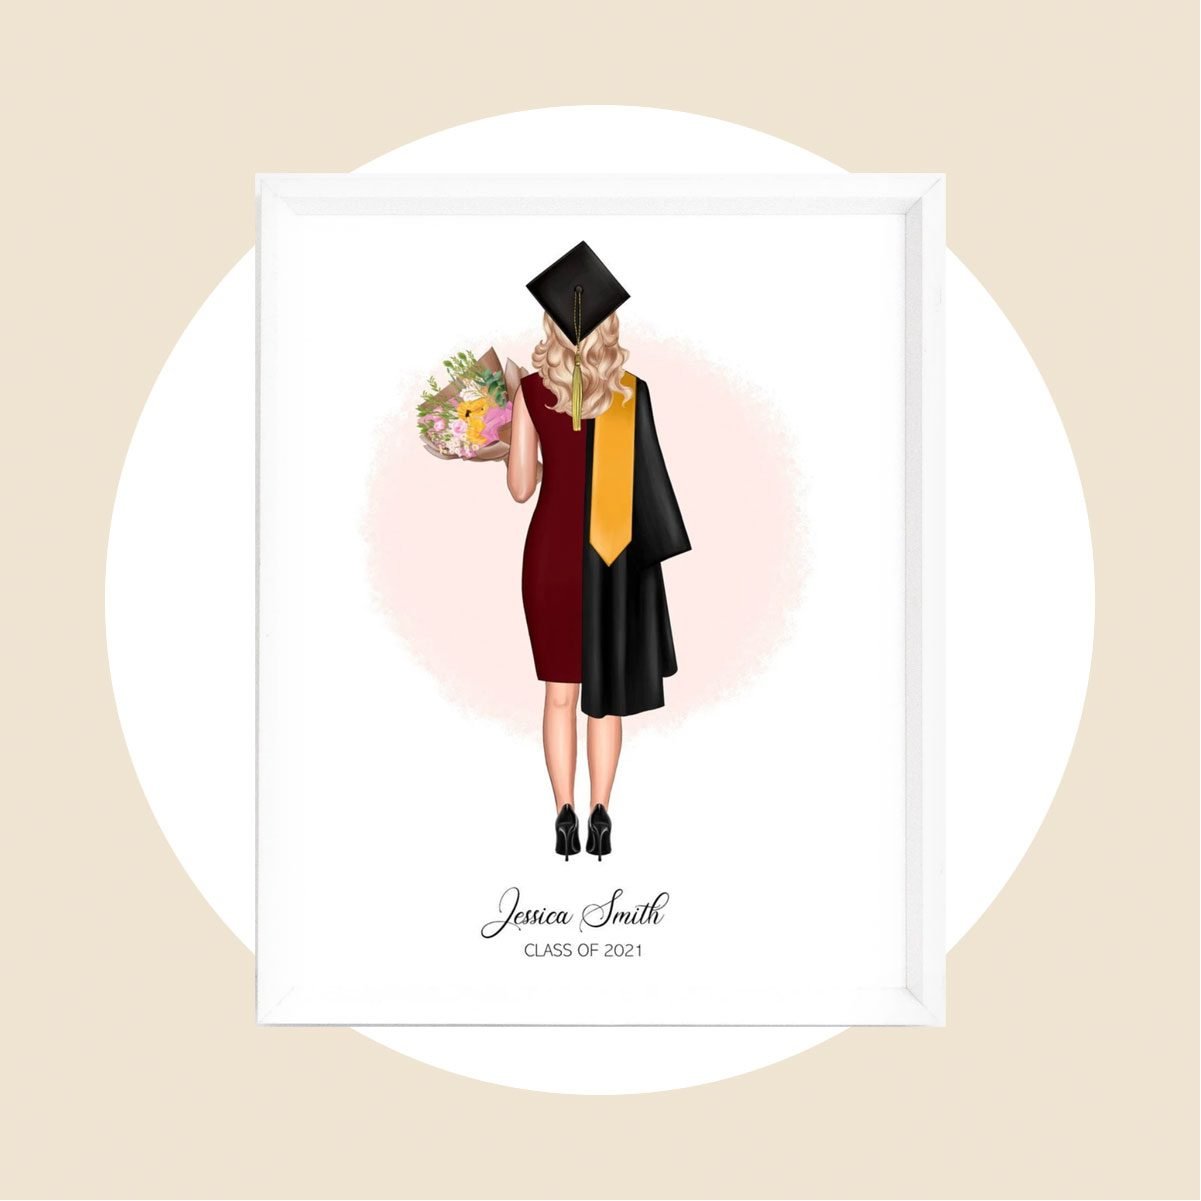 https://www.tasteofhome.com/wp-content/uploads/2022/05/personalized-graduation-character-card-ecomm-via-etsy.jpg?fit=700%2C700